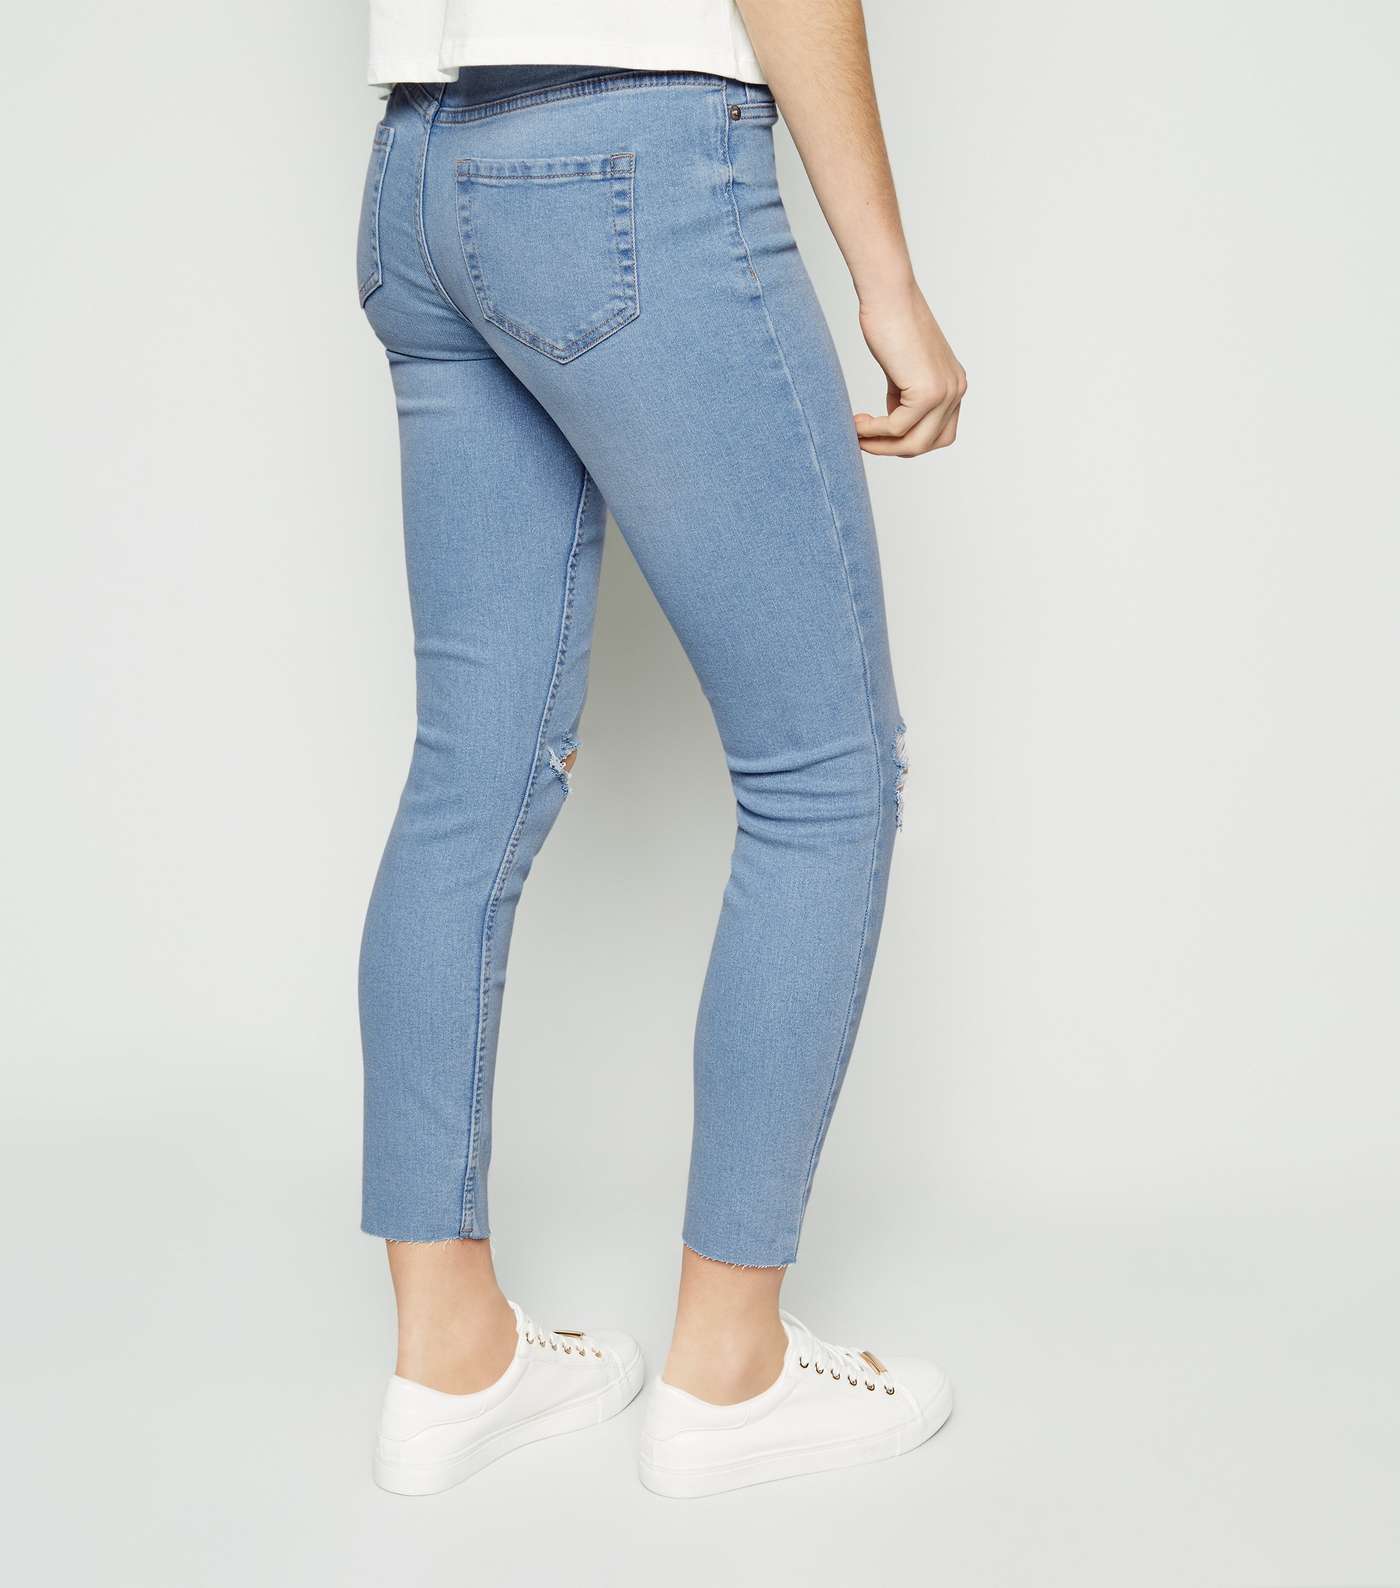 Bright Blue Bleach Wash Ripped Jenna Jeans Image 3